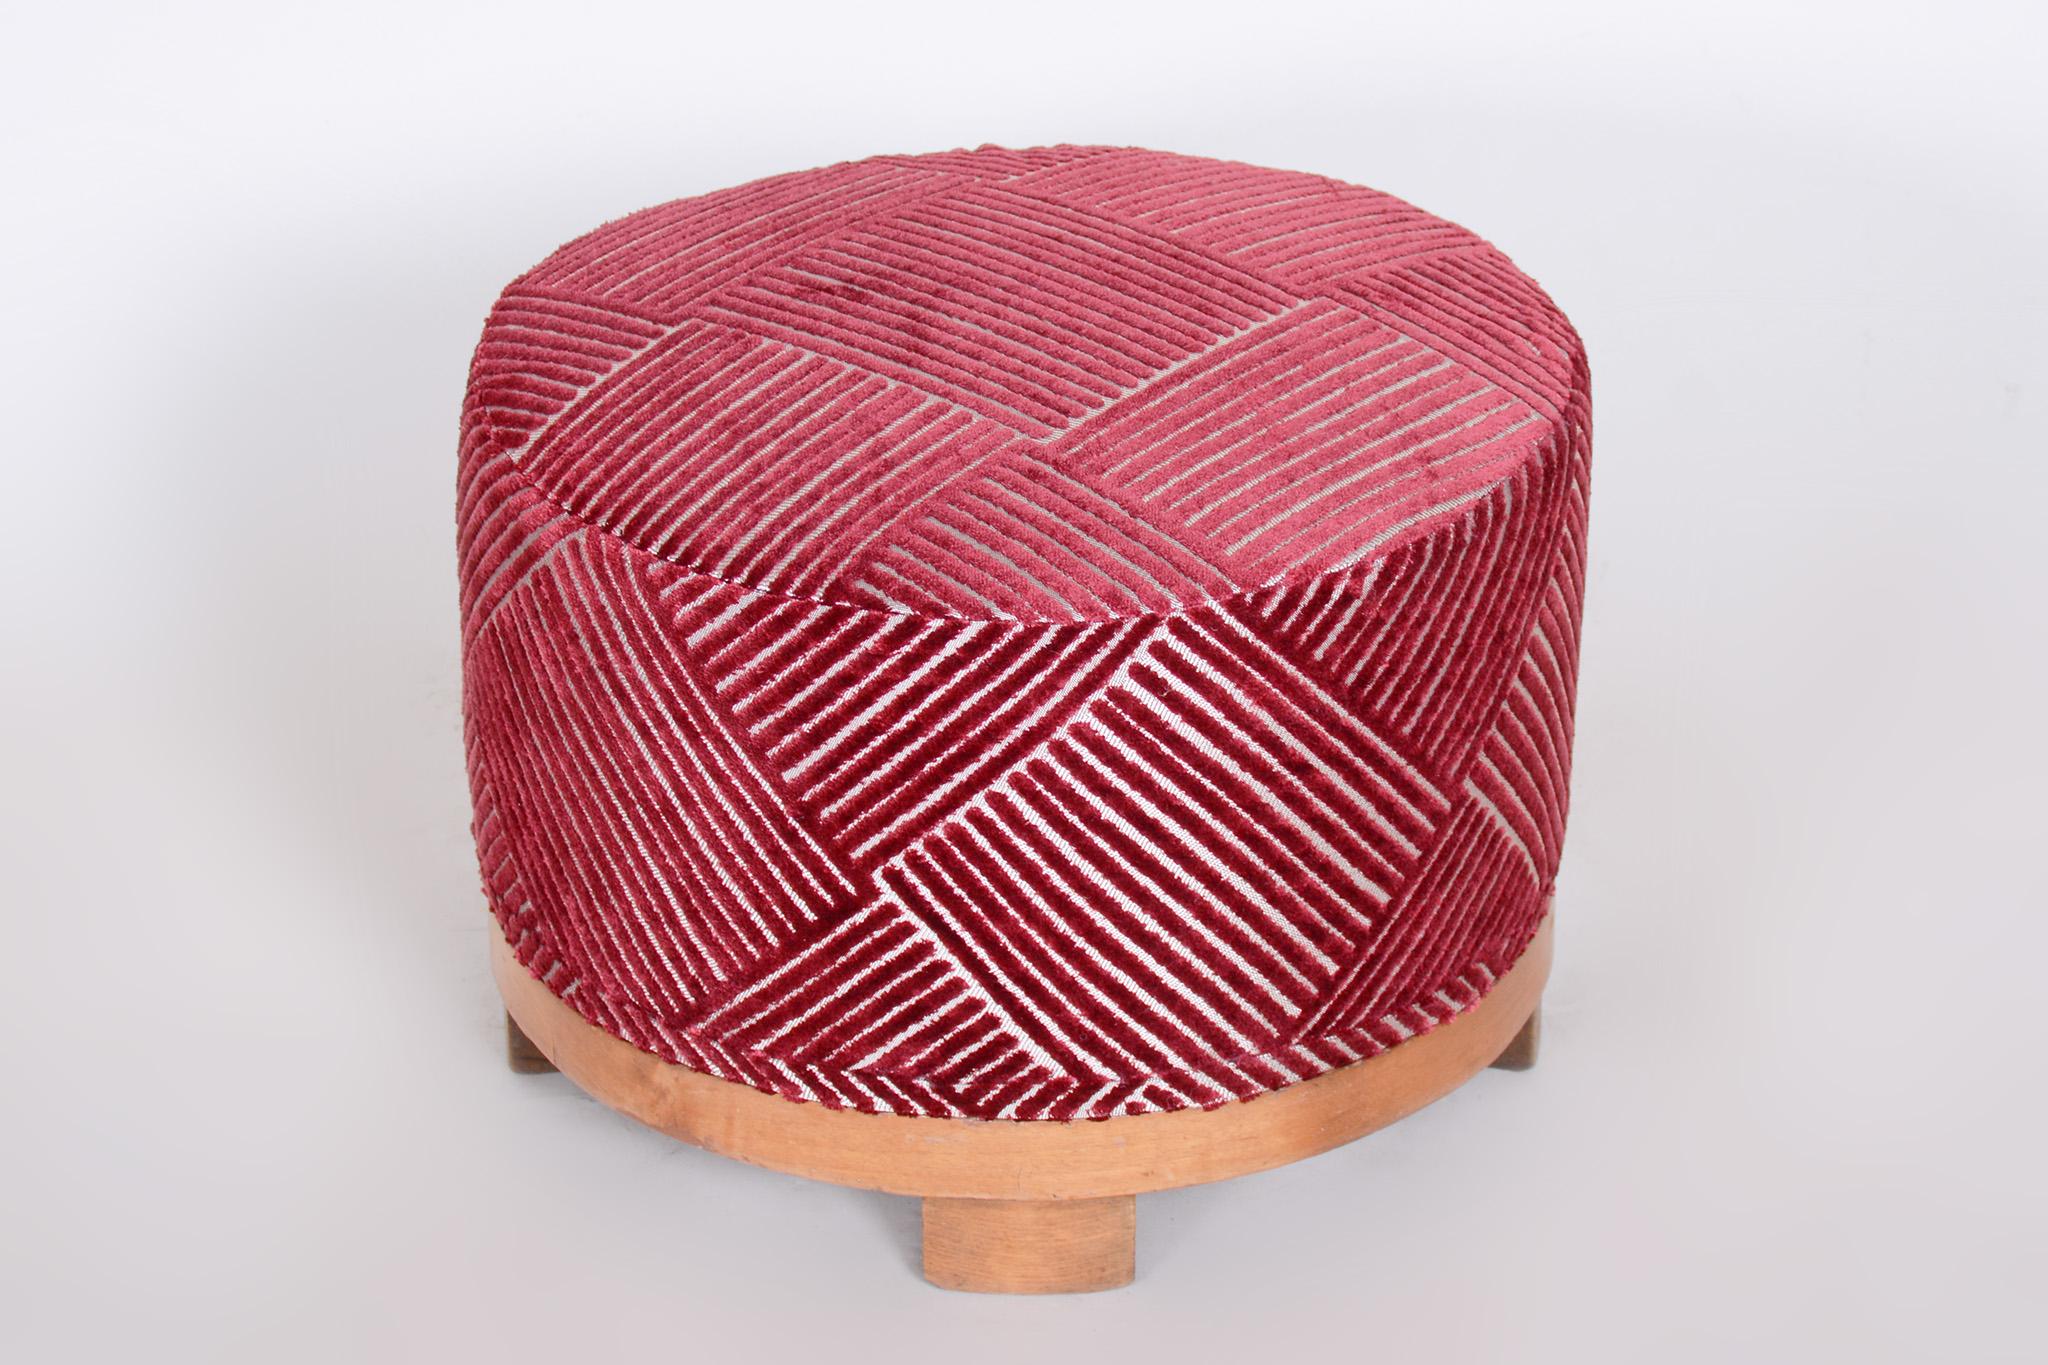 20th Century Red Art Deco Stool, Made in the 1920s, Fully Restored